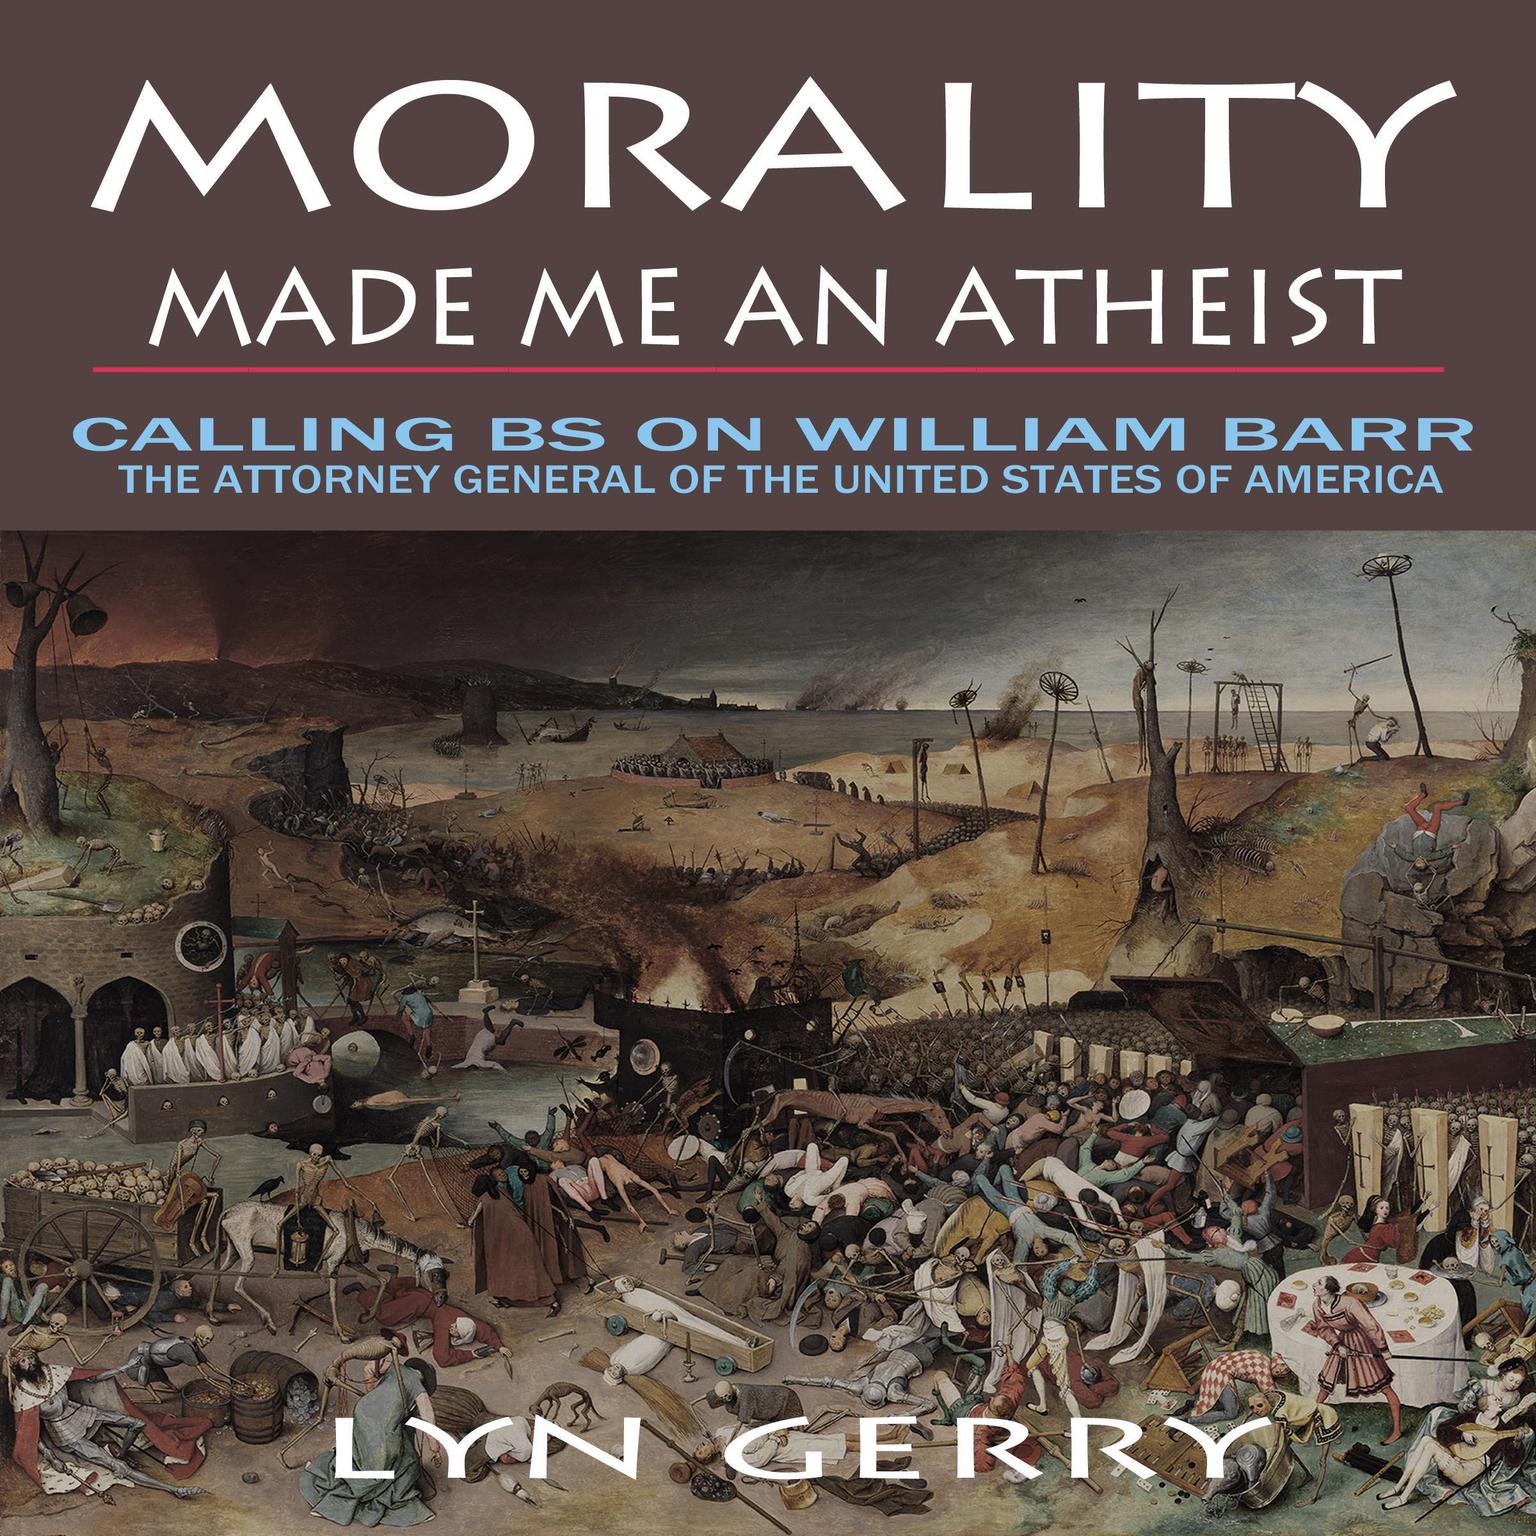 Morality Made Me an Atheist: Calling BS on William Barr, the Attorney General of the United States of America Audiobook, by Lyn Gerry